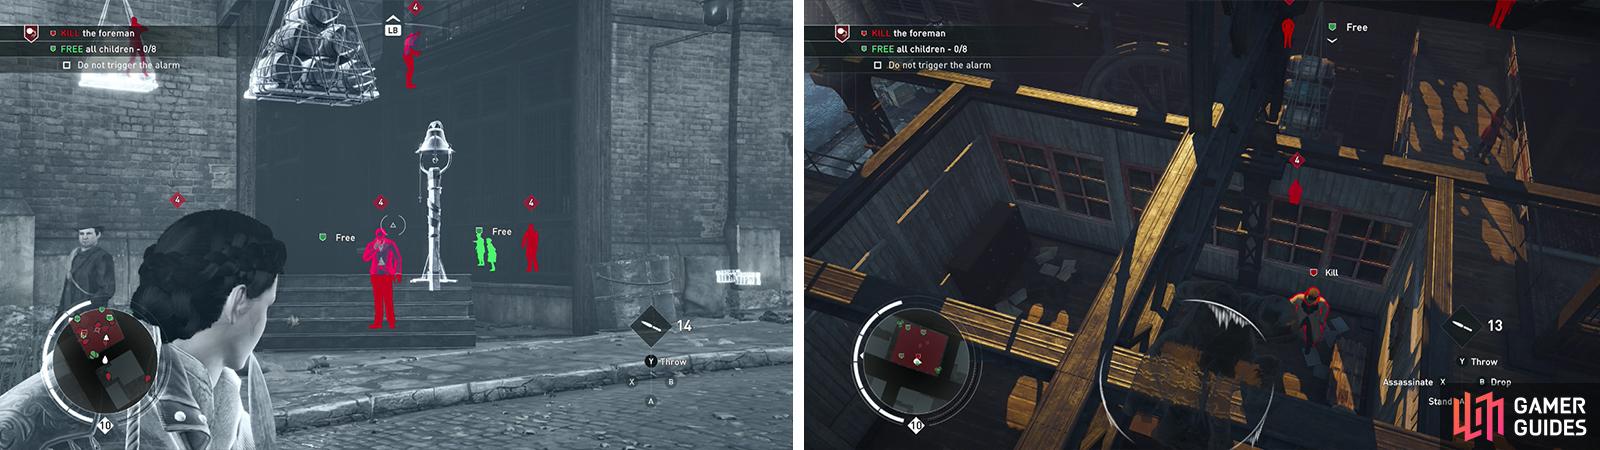 Disabling the alarm bell will make things easier (left). Afterwards climb to the rooftop and kill the foreman (right).